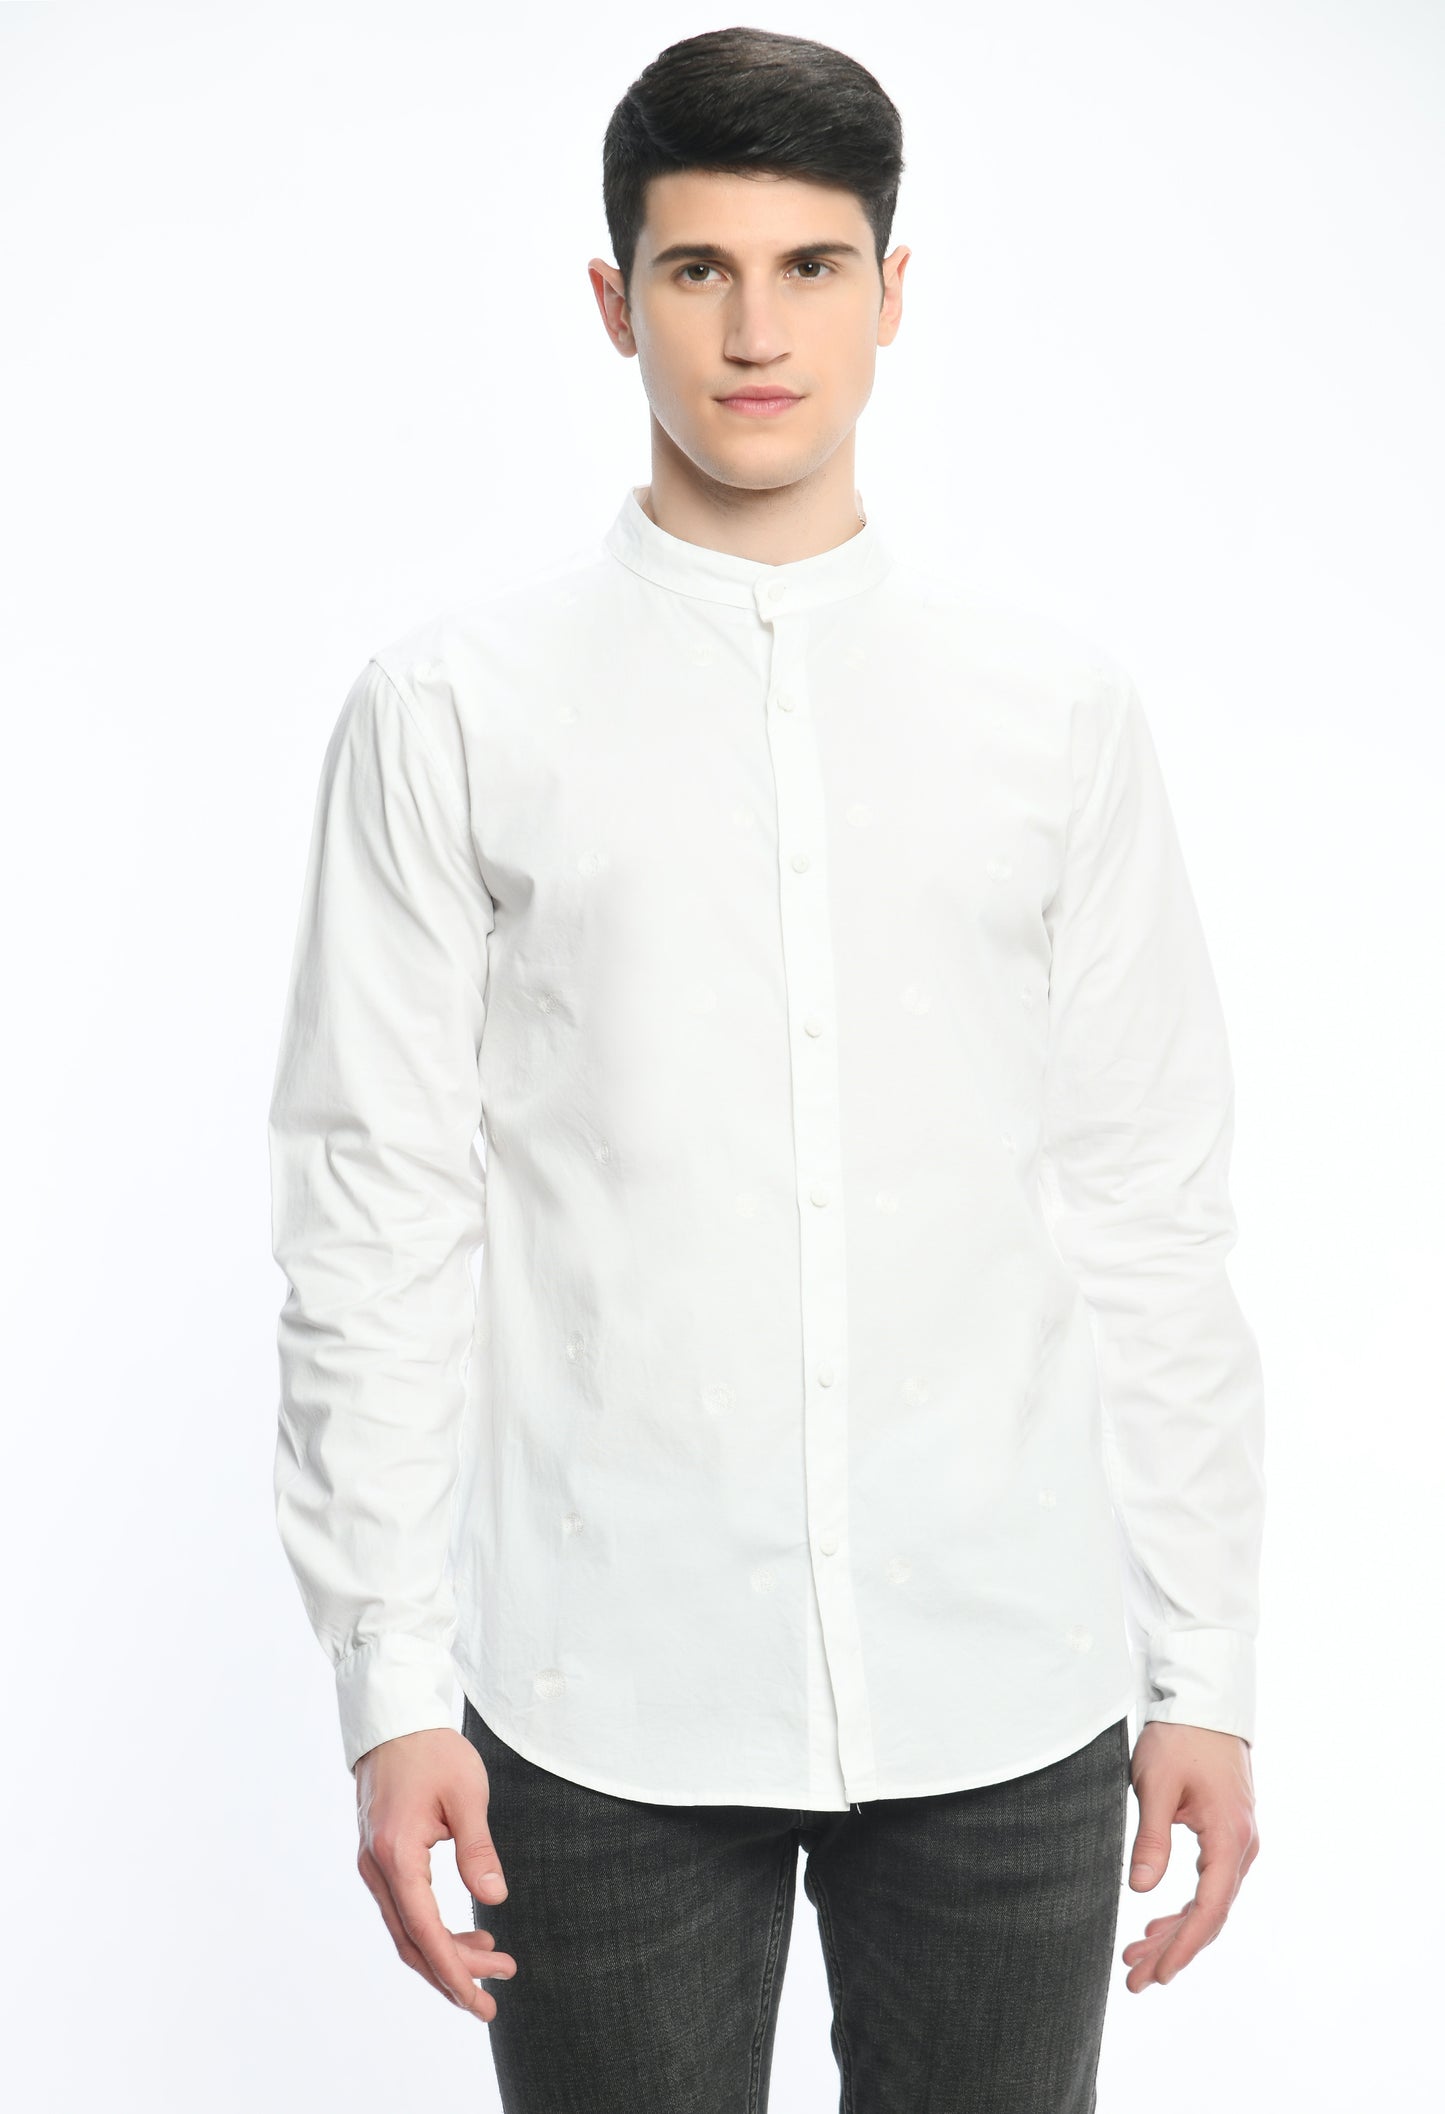 A white cotton shirt with band neckline, showcasing tone on tone thread embroidery